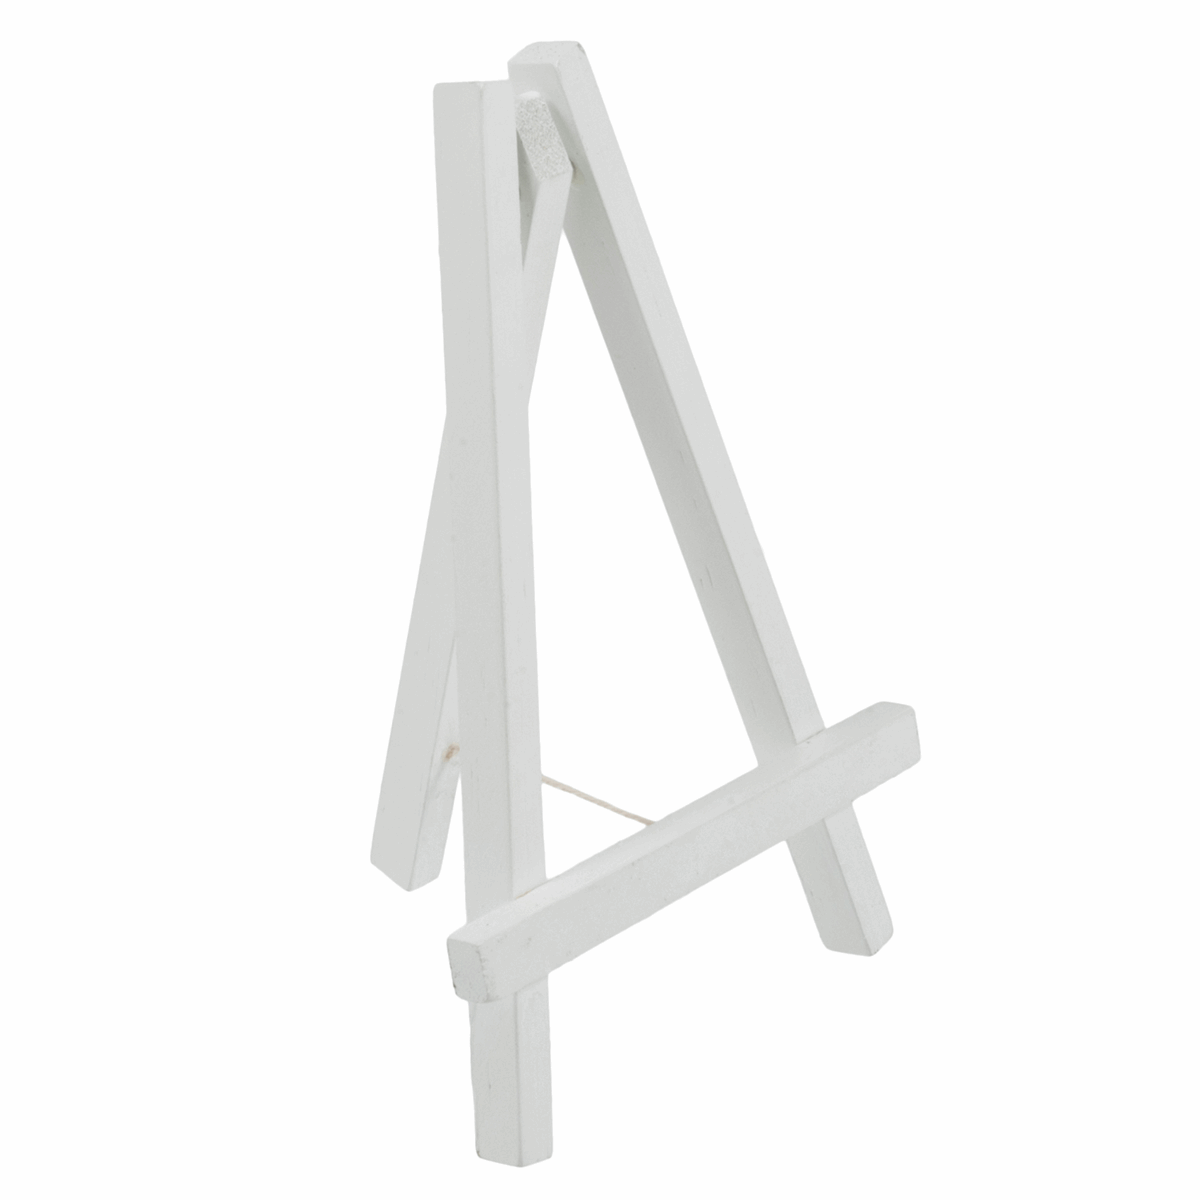 Small White Wooden Easel - 10cm x 16cm